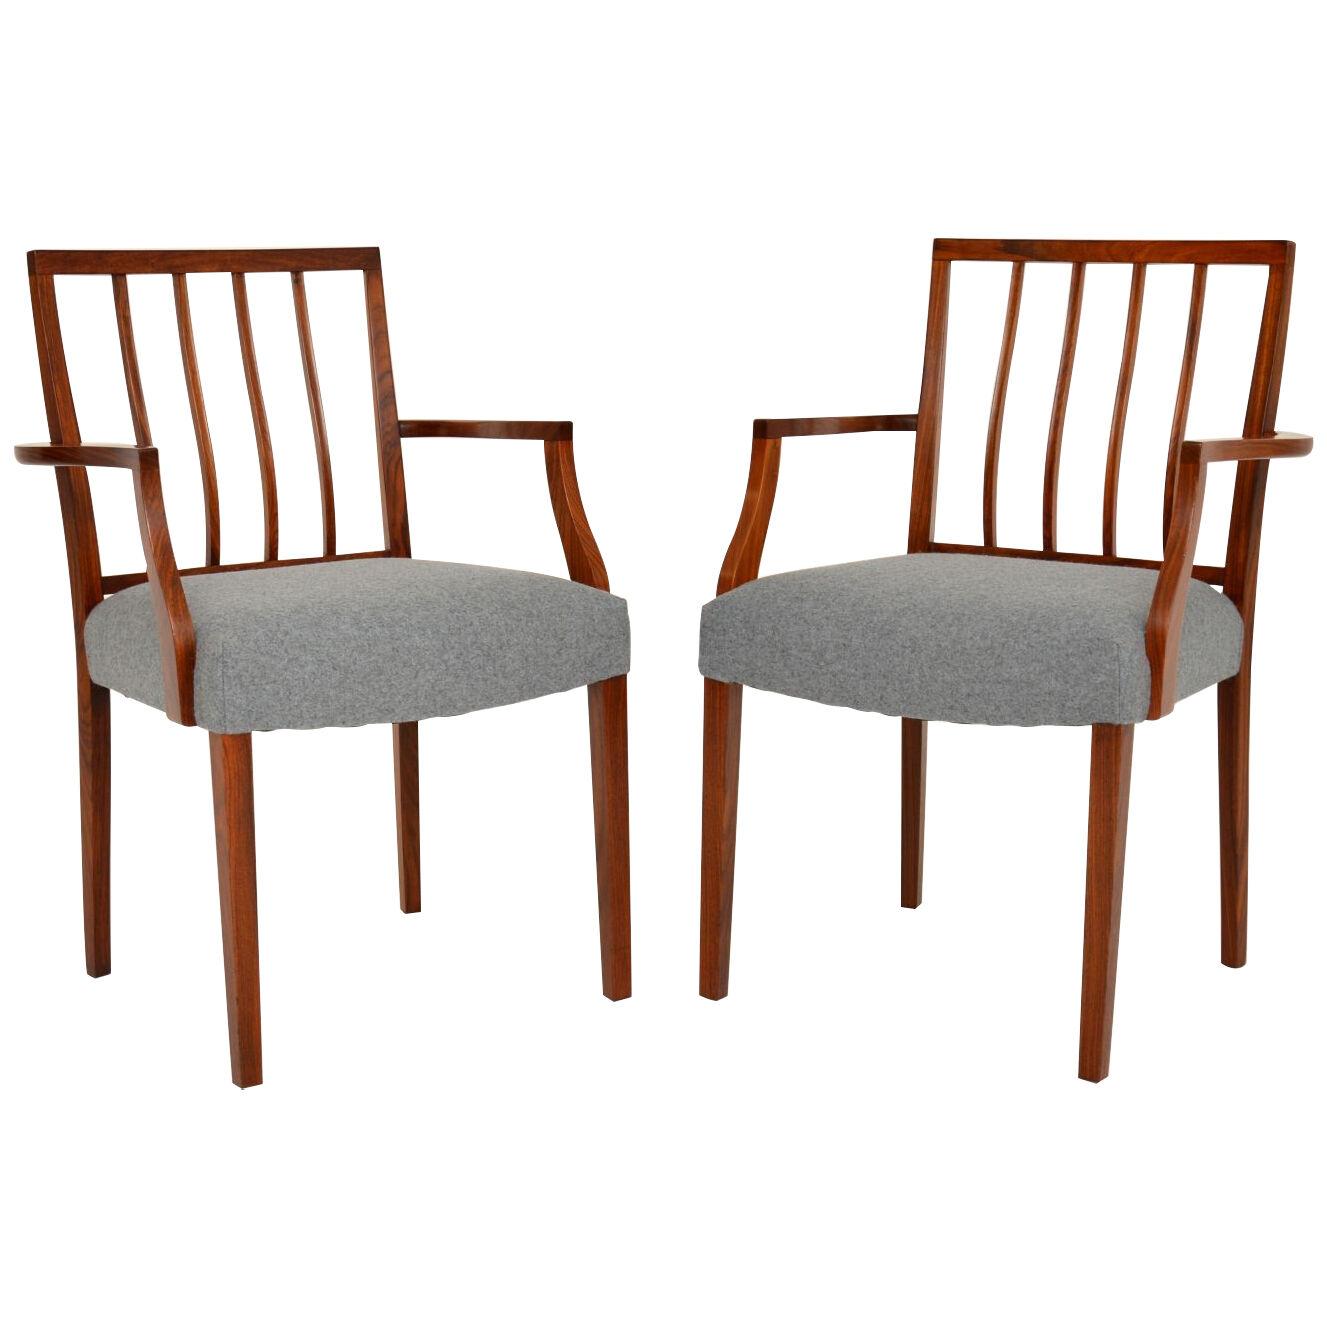 Pair of Vintage Rosewood Carver Armchairs by Robert Heritage for Archie Shine